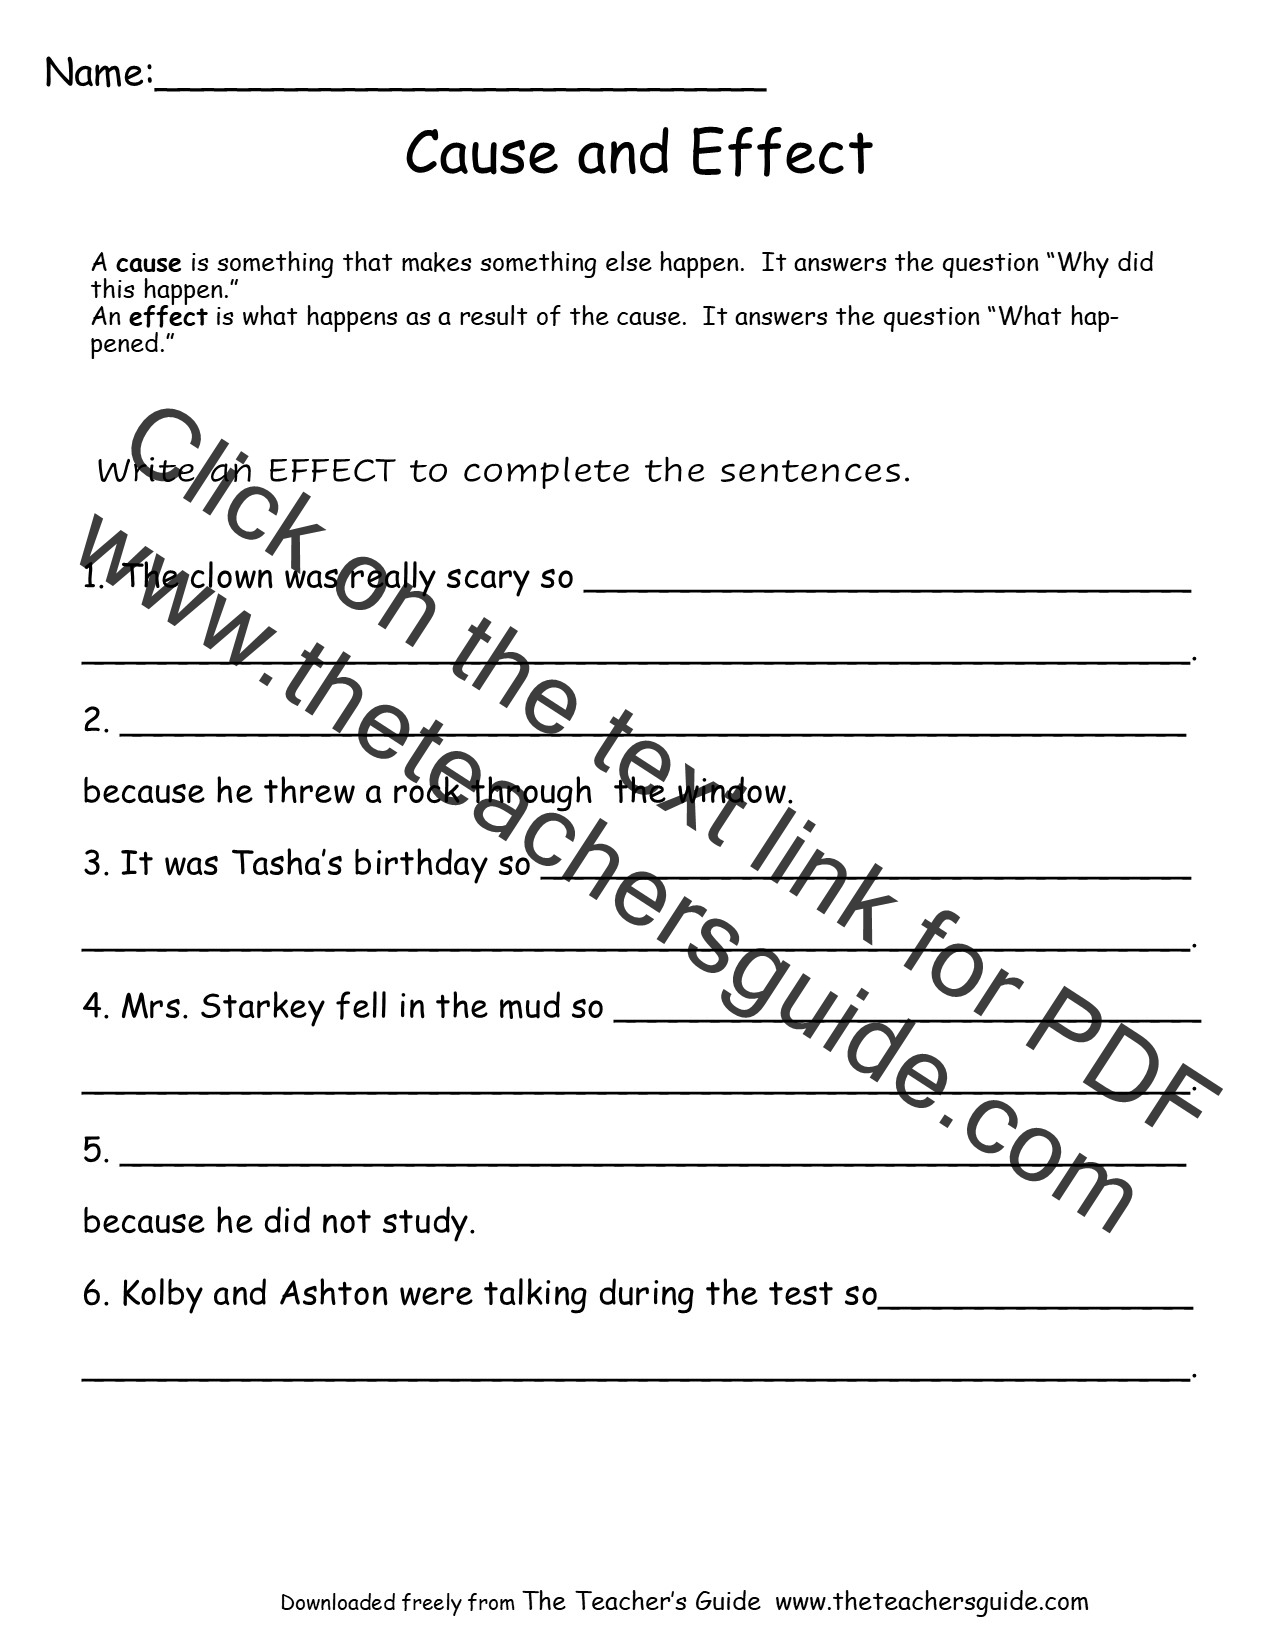 Cause and Effect Worksheets from The Teacher's Guide